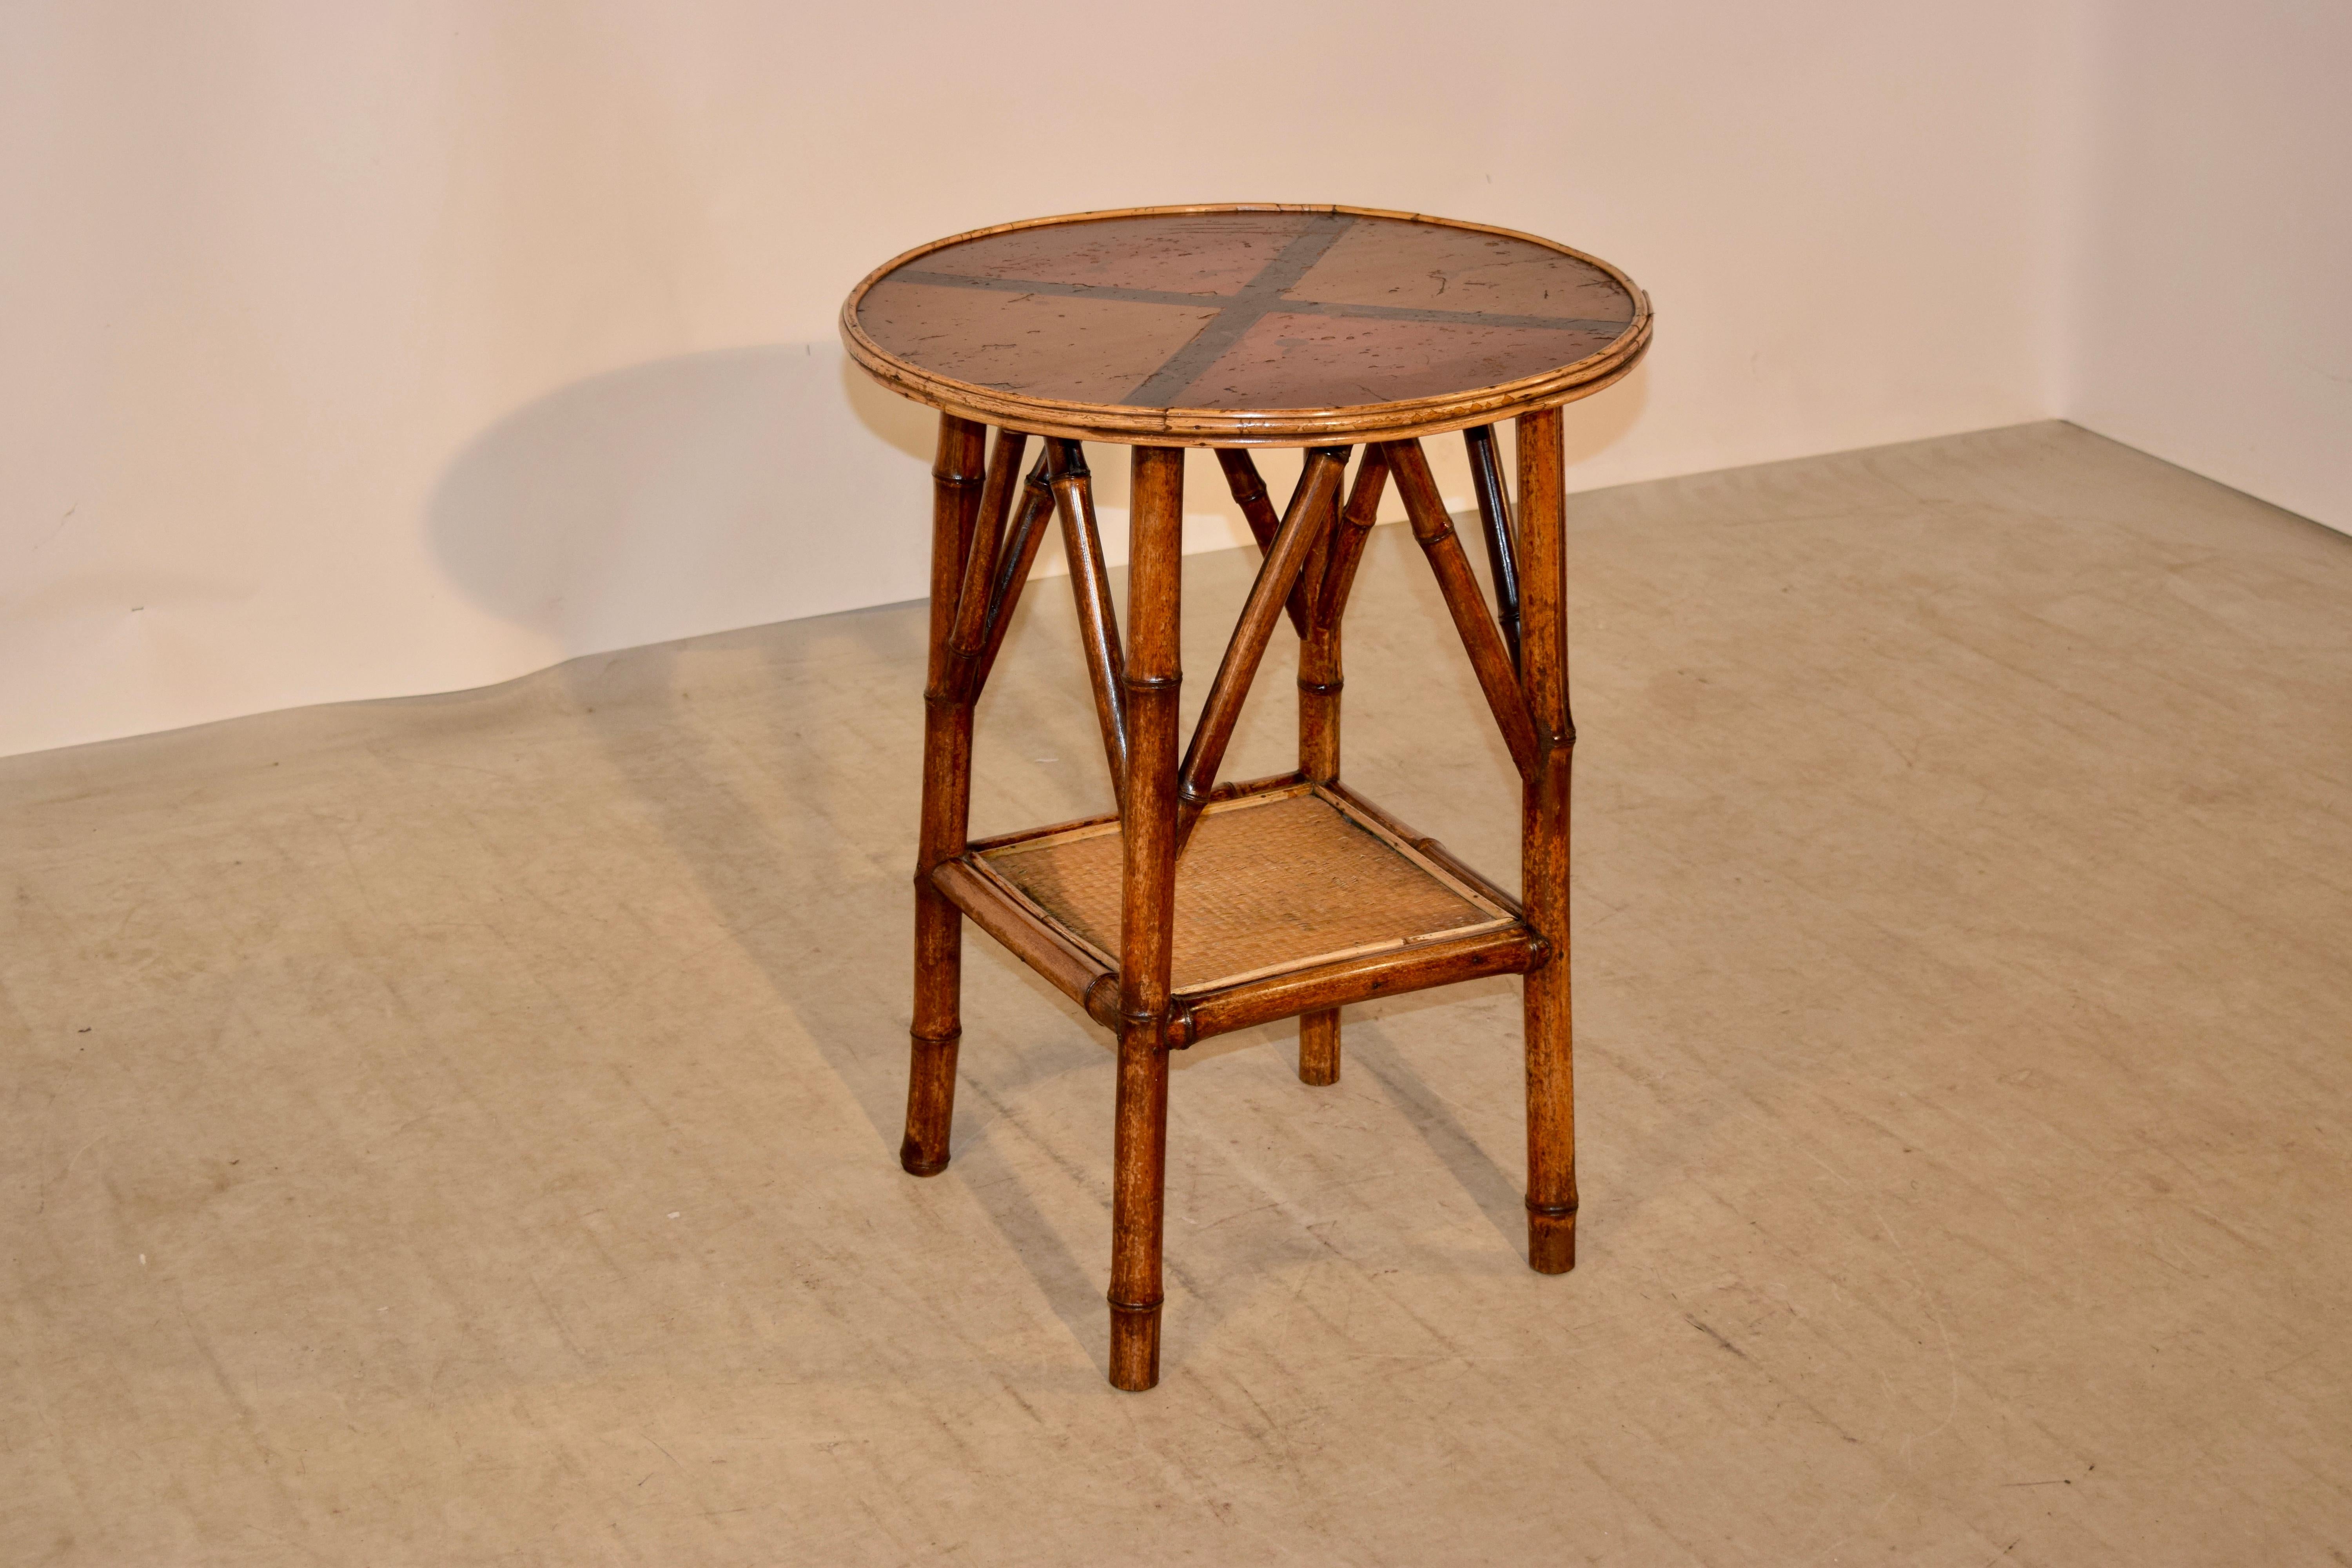 19th century bamboo side table from France with a round top with a hand painted top and bamboo banding around the edge, following down to bamboo legs joined by a lower shelf, which is covered in rush.